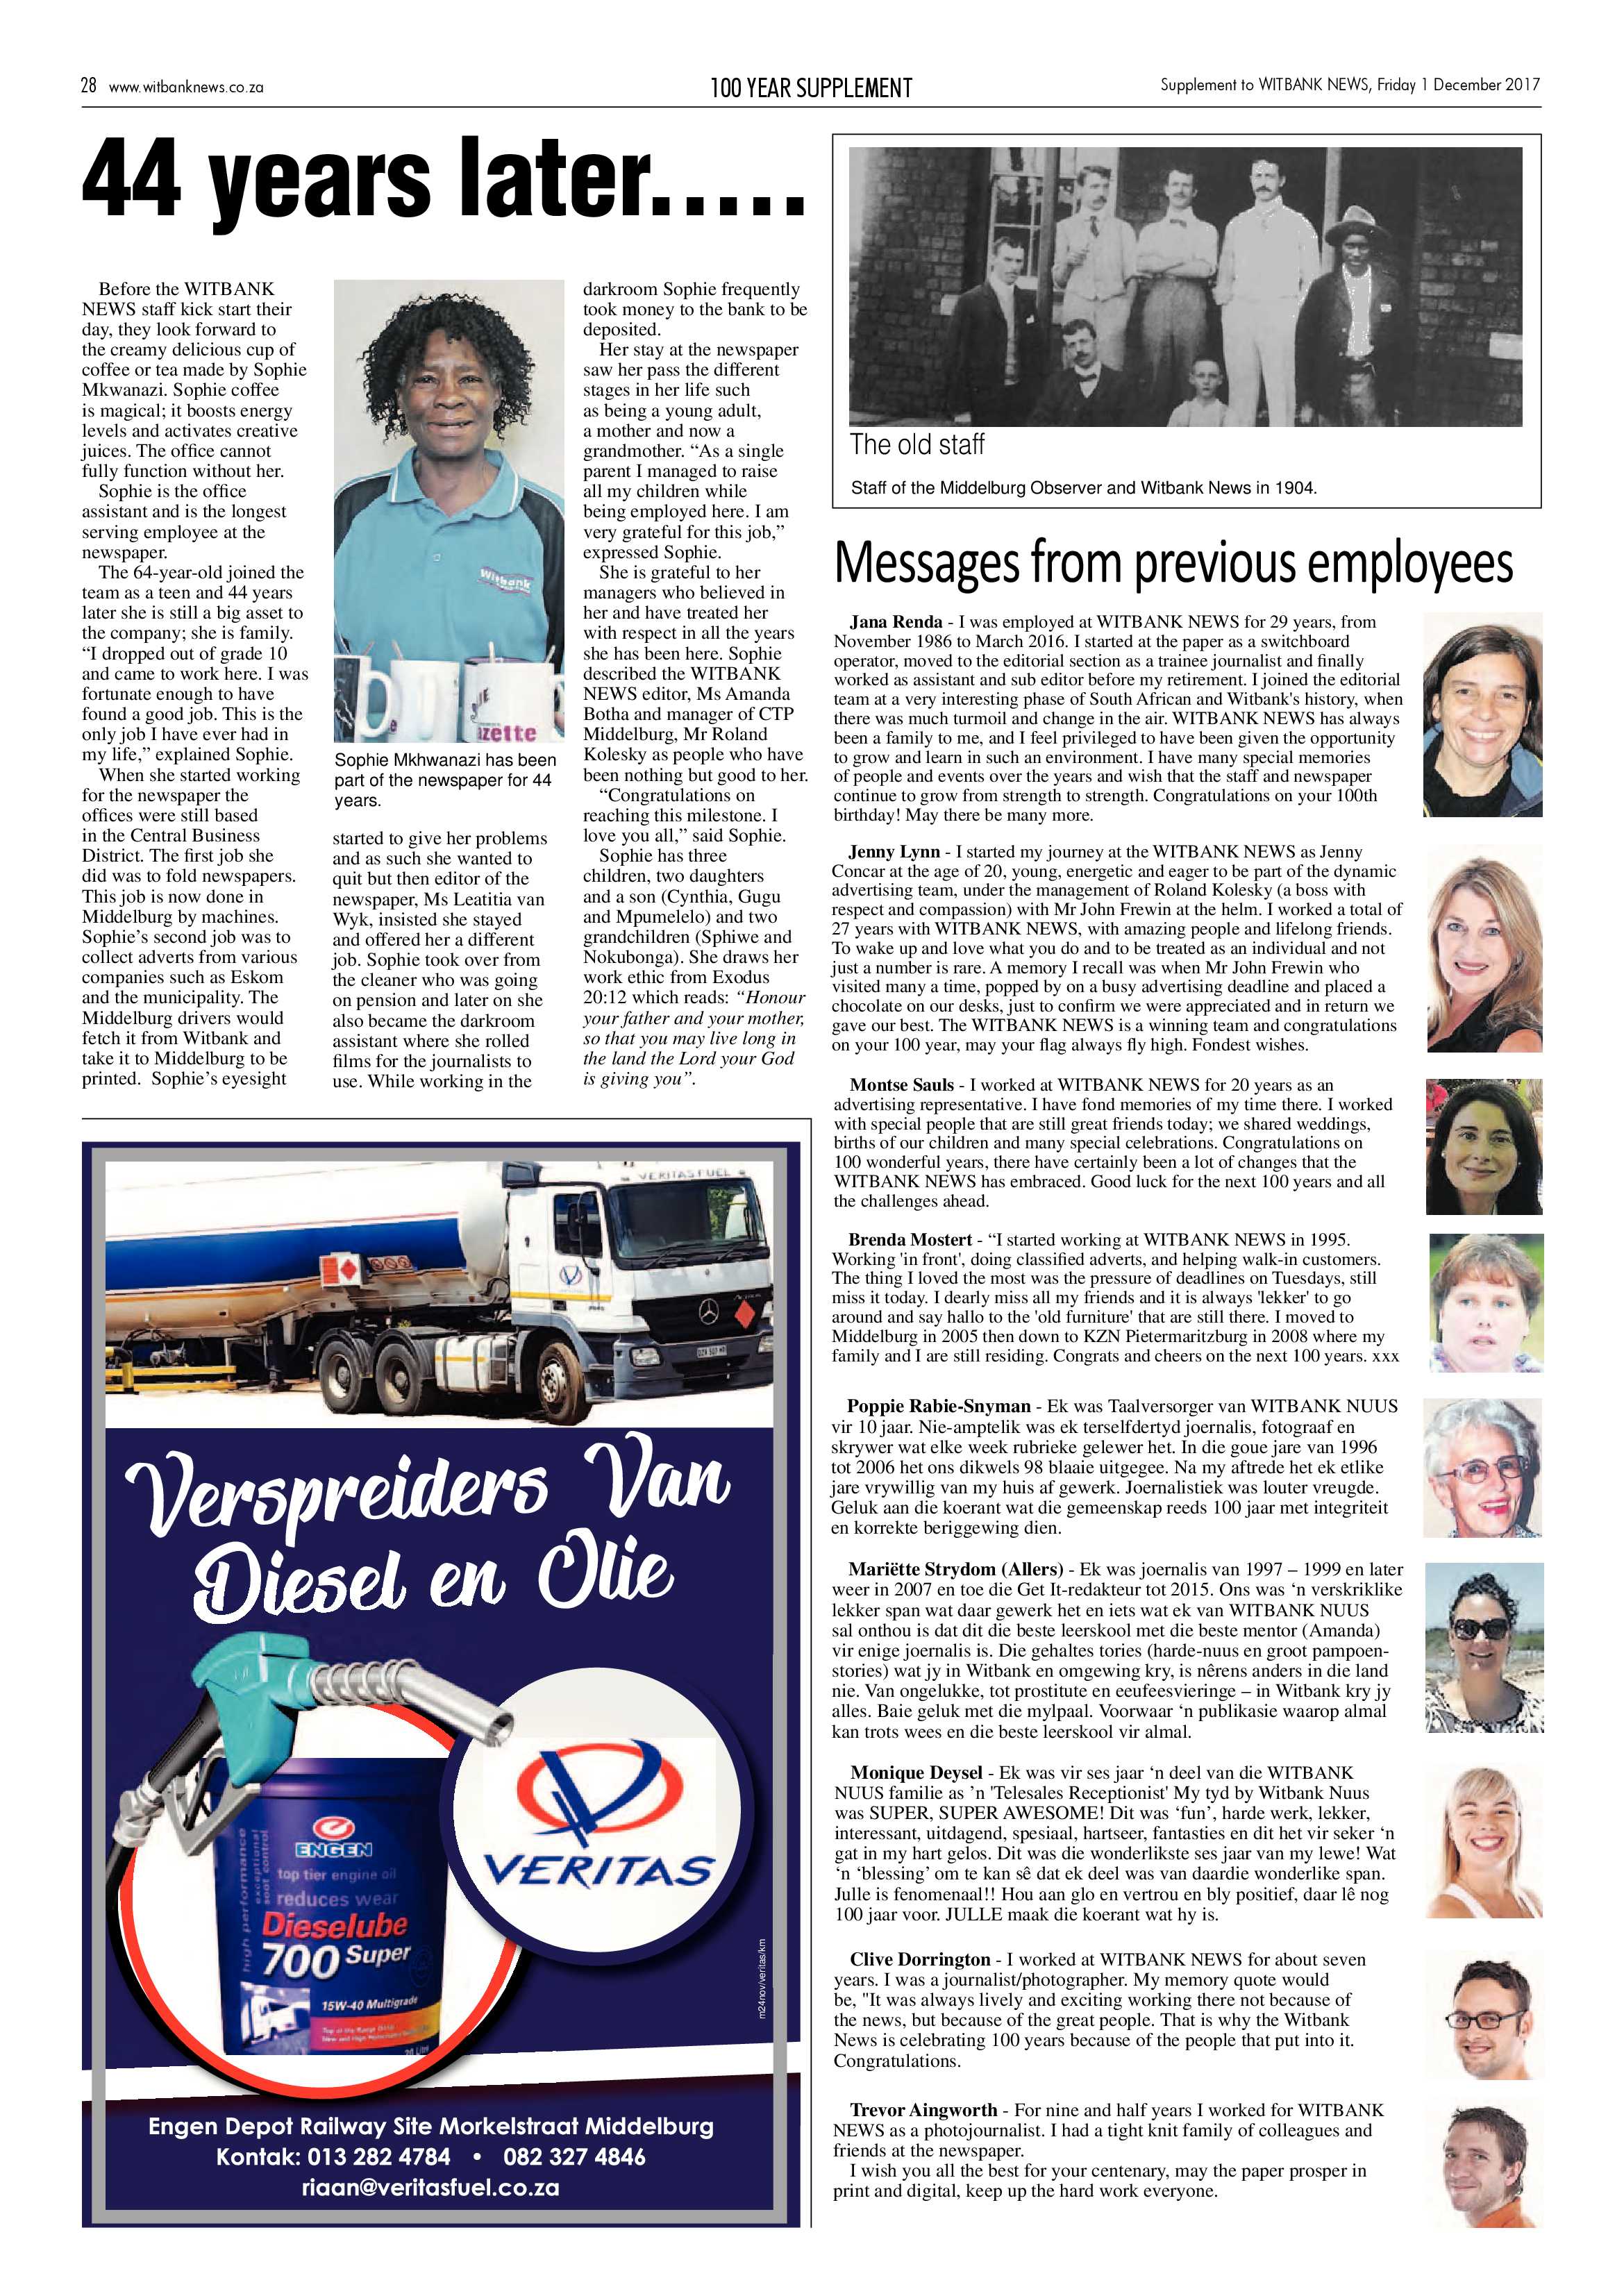 Witbank News 100 Year Supplement page 28